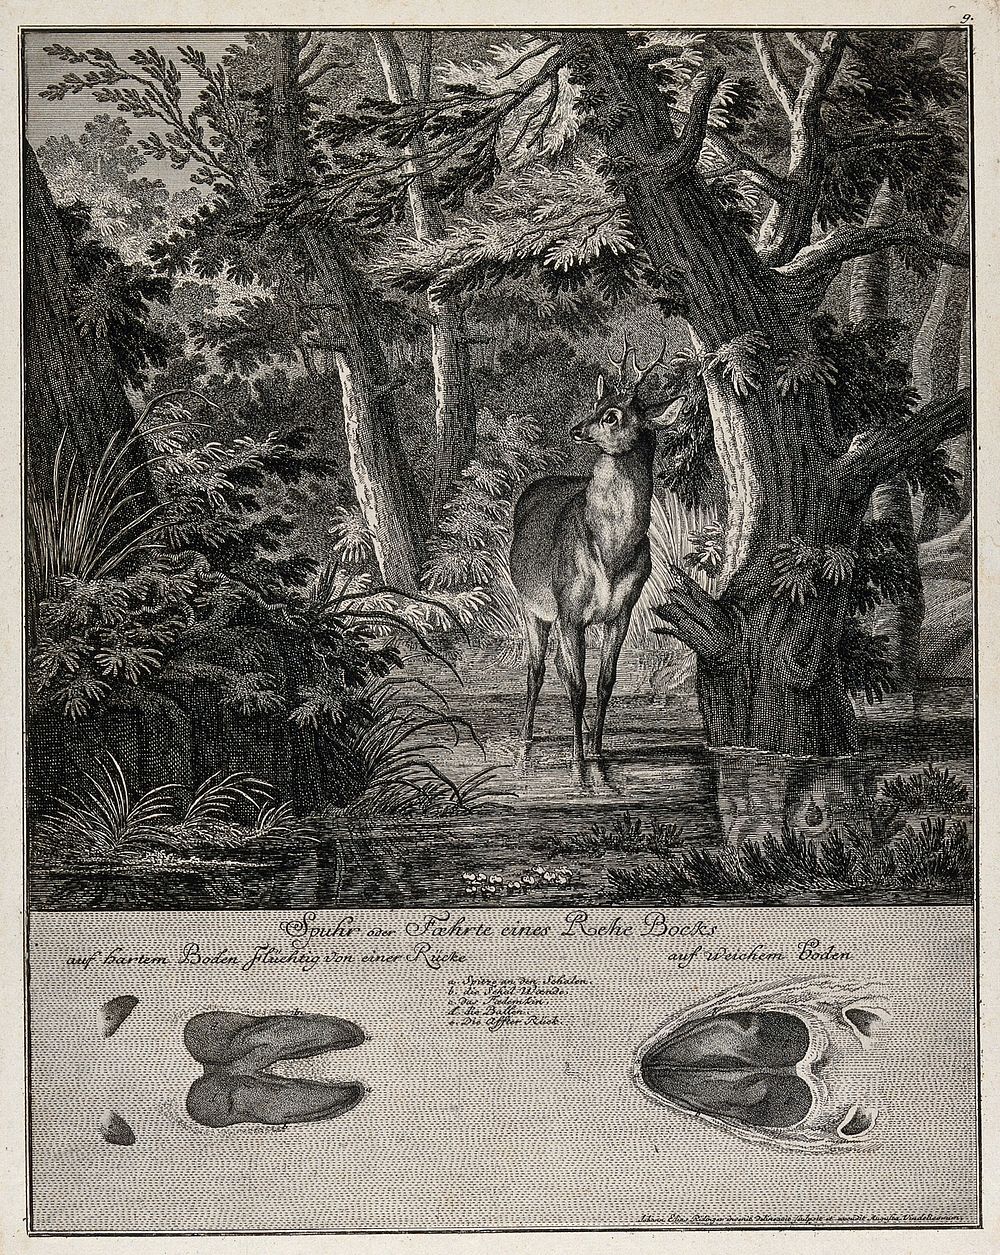 Above, a roebuck crossing a shallow stream in the forest, below, its track. Etching by J. E. Ridinger.